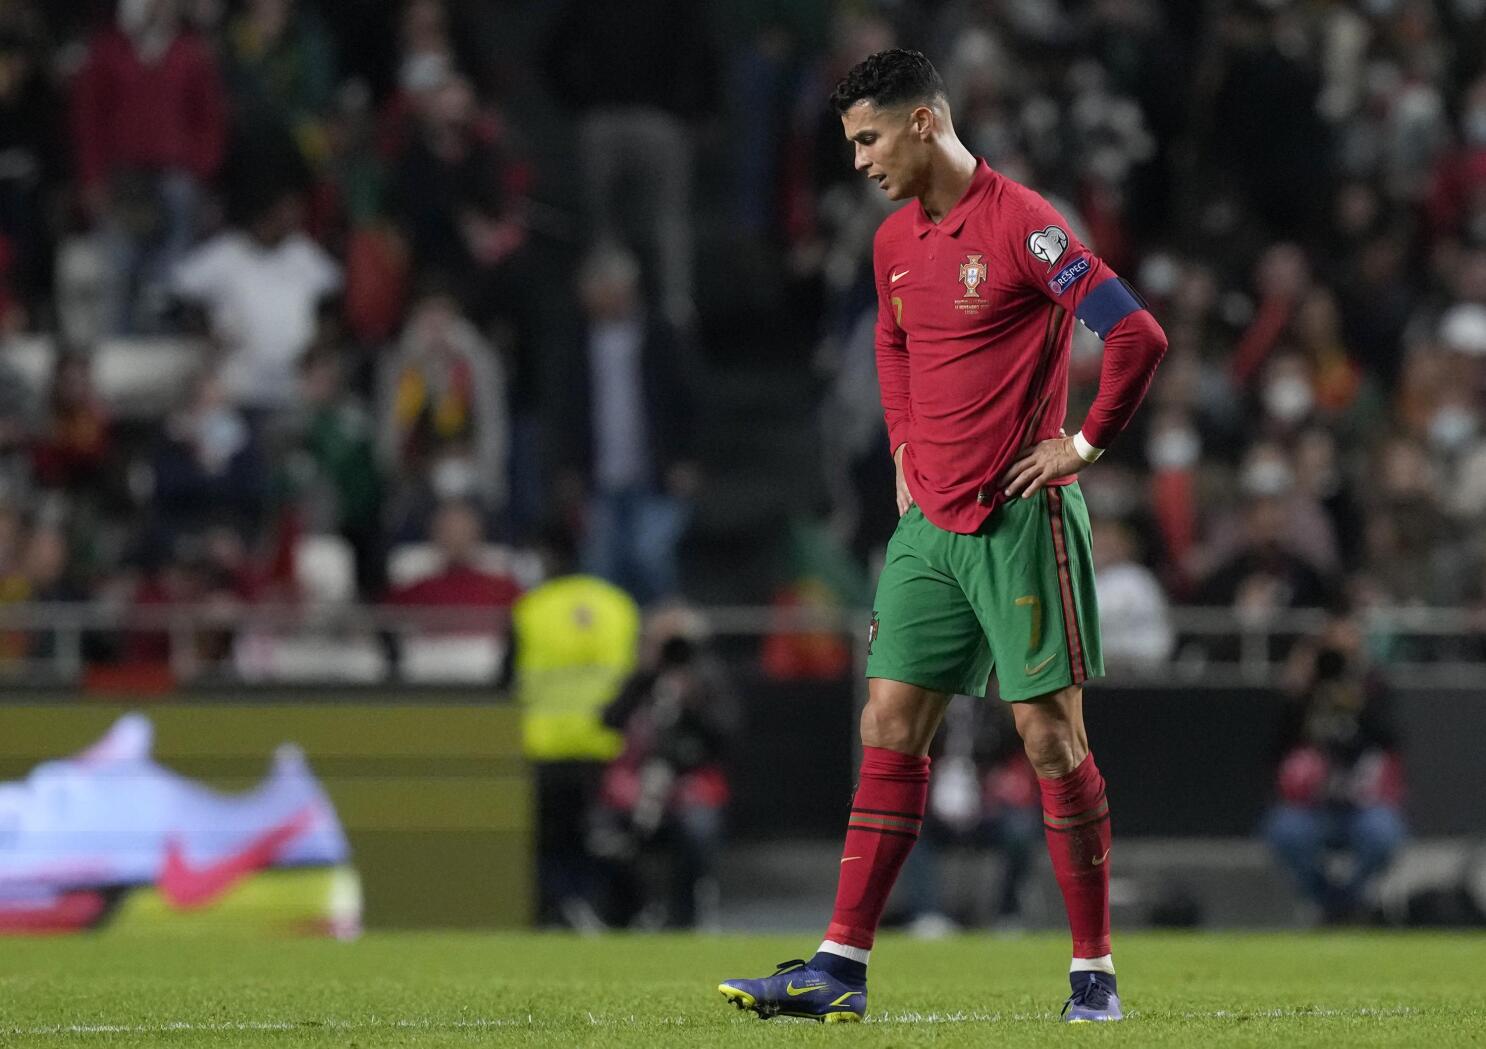 Bizarre goal by Cristiano Ronaldo: The goalkeeper couldn't see a thing